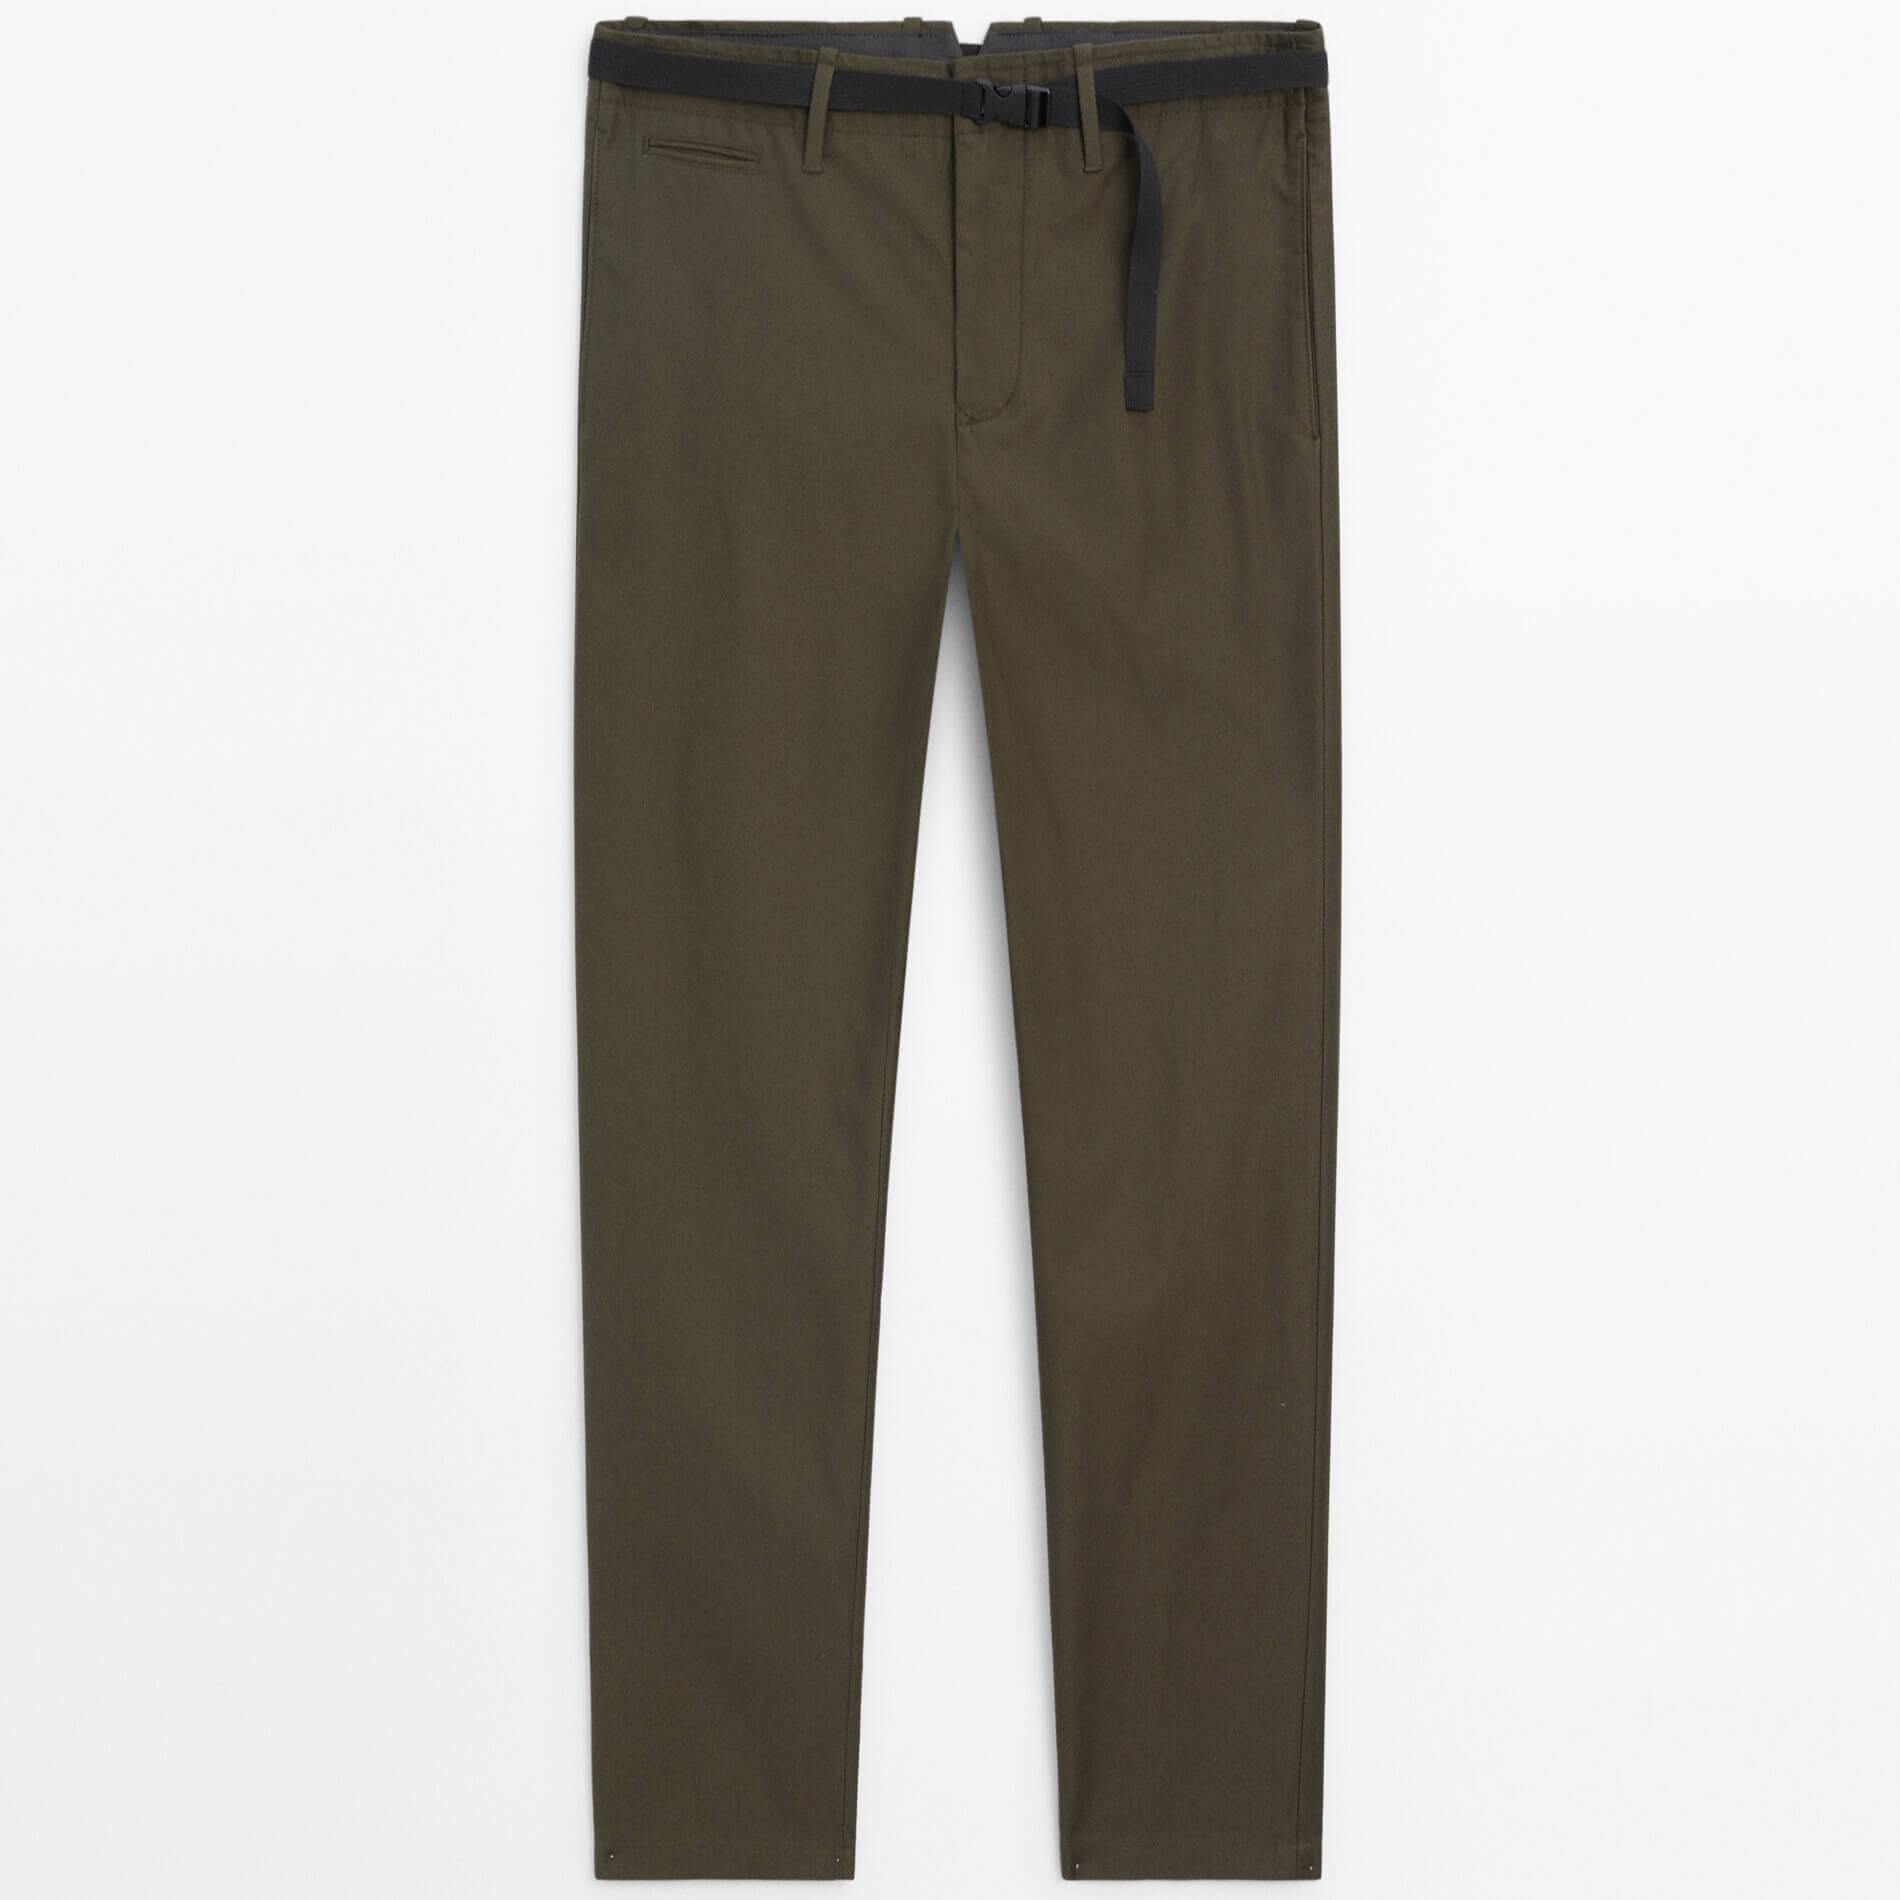 Брюки Massimo Dutti Relaxed Fit Belted Chino, хаки брюки чинос massimo dutti relaxed fit wool limited edition зелёный